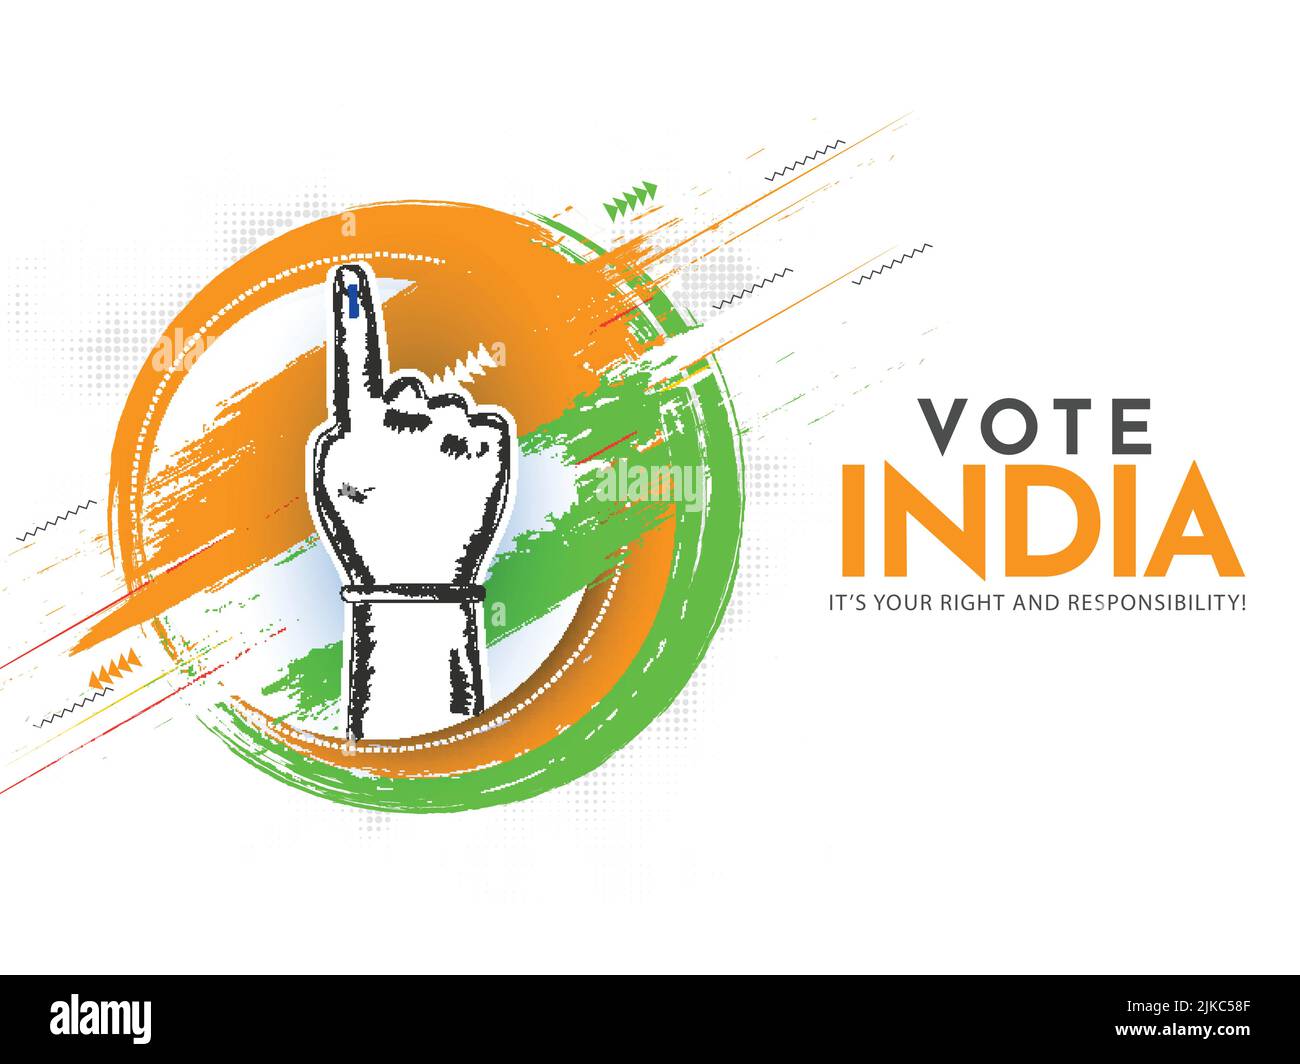 Vote India, It's Your Right And Responsibility Text With Sticker Style Indian Voter Hand, Saffron And Green Brush Circular On White Background. Stock Vector